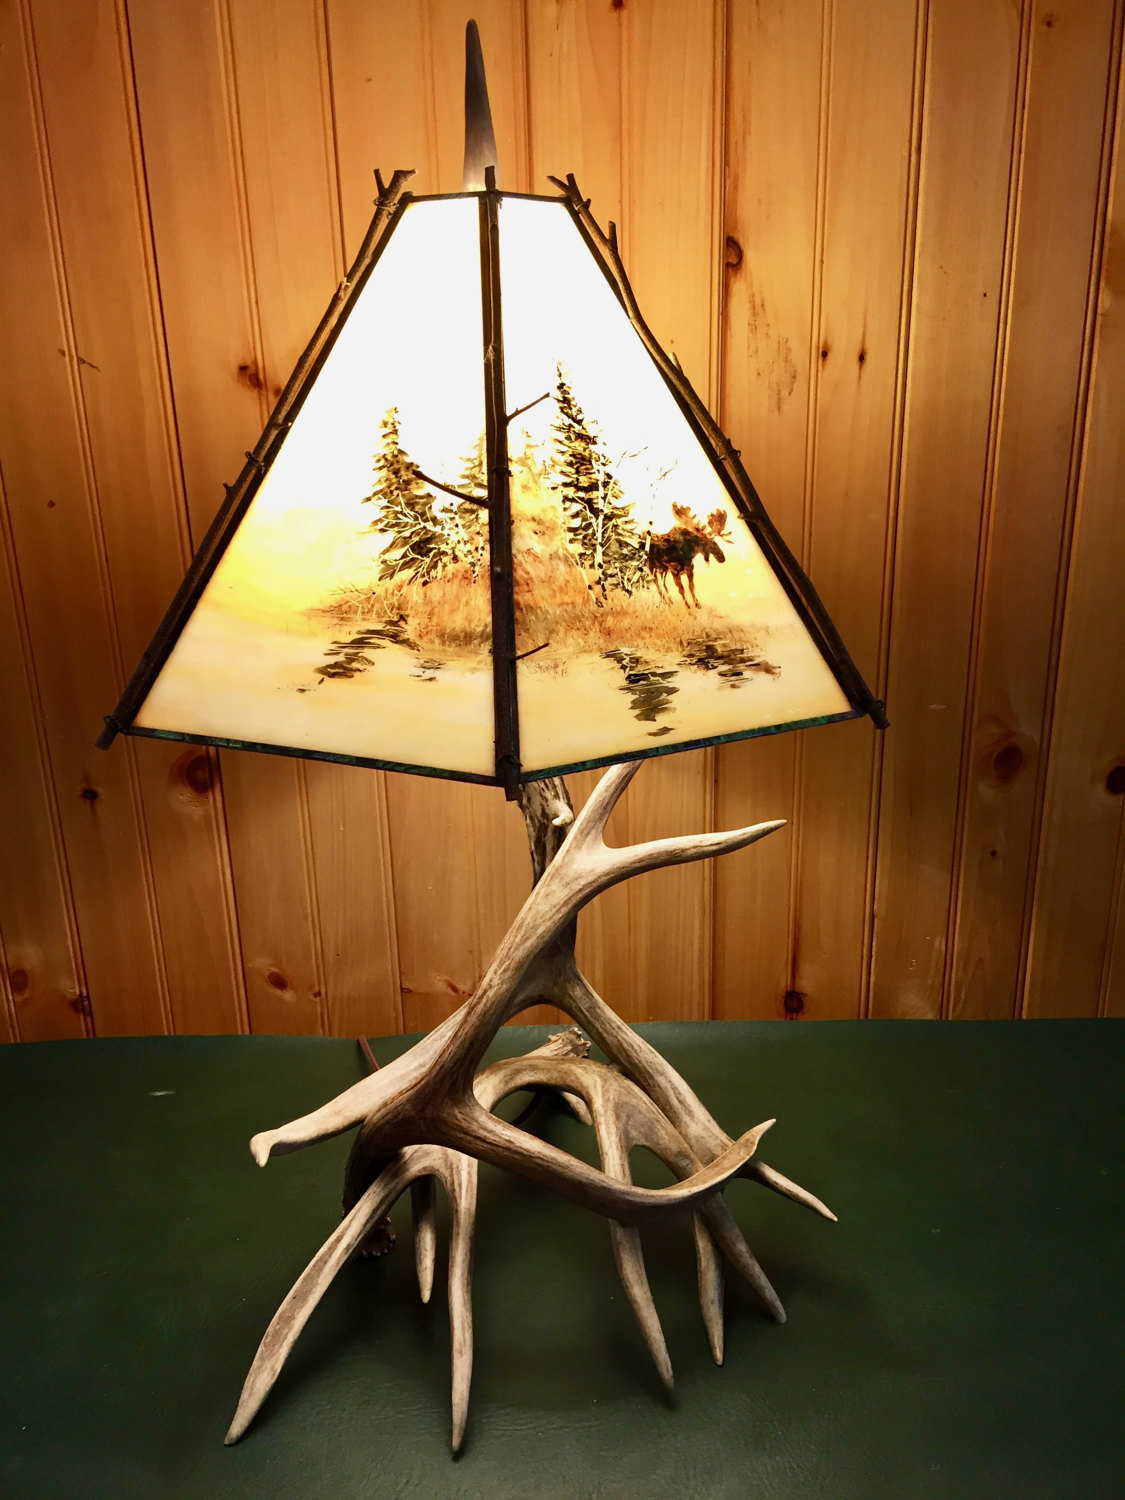 Real Deer Antler Table Lamp with Custom Stained Glass Shade - Mad River